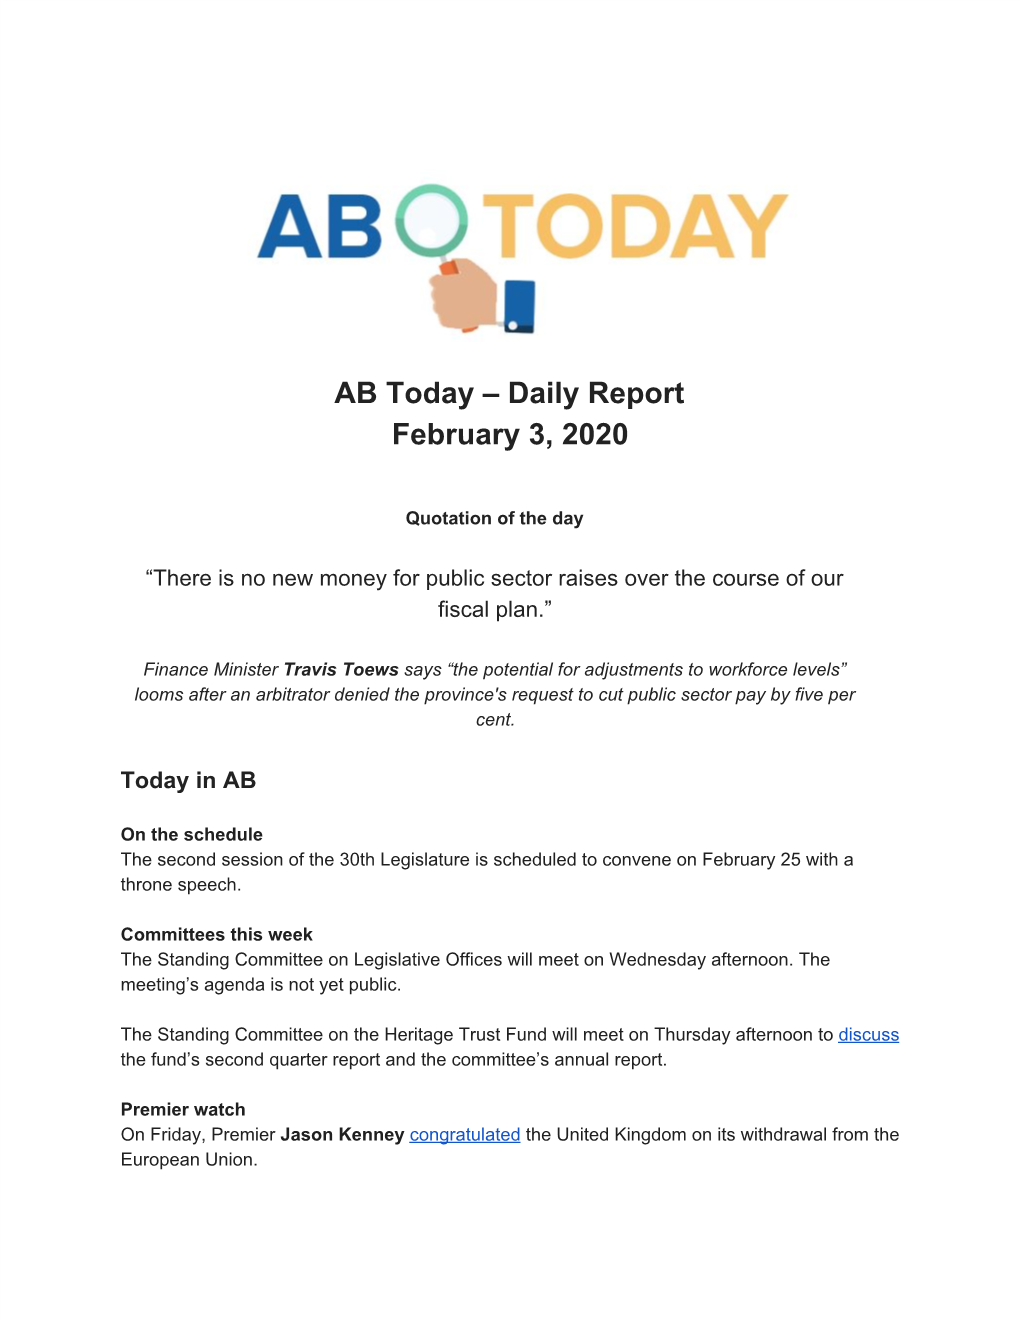 AB Today – Daily Report February 3, 2020